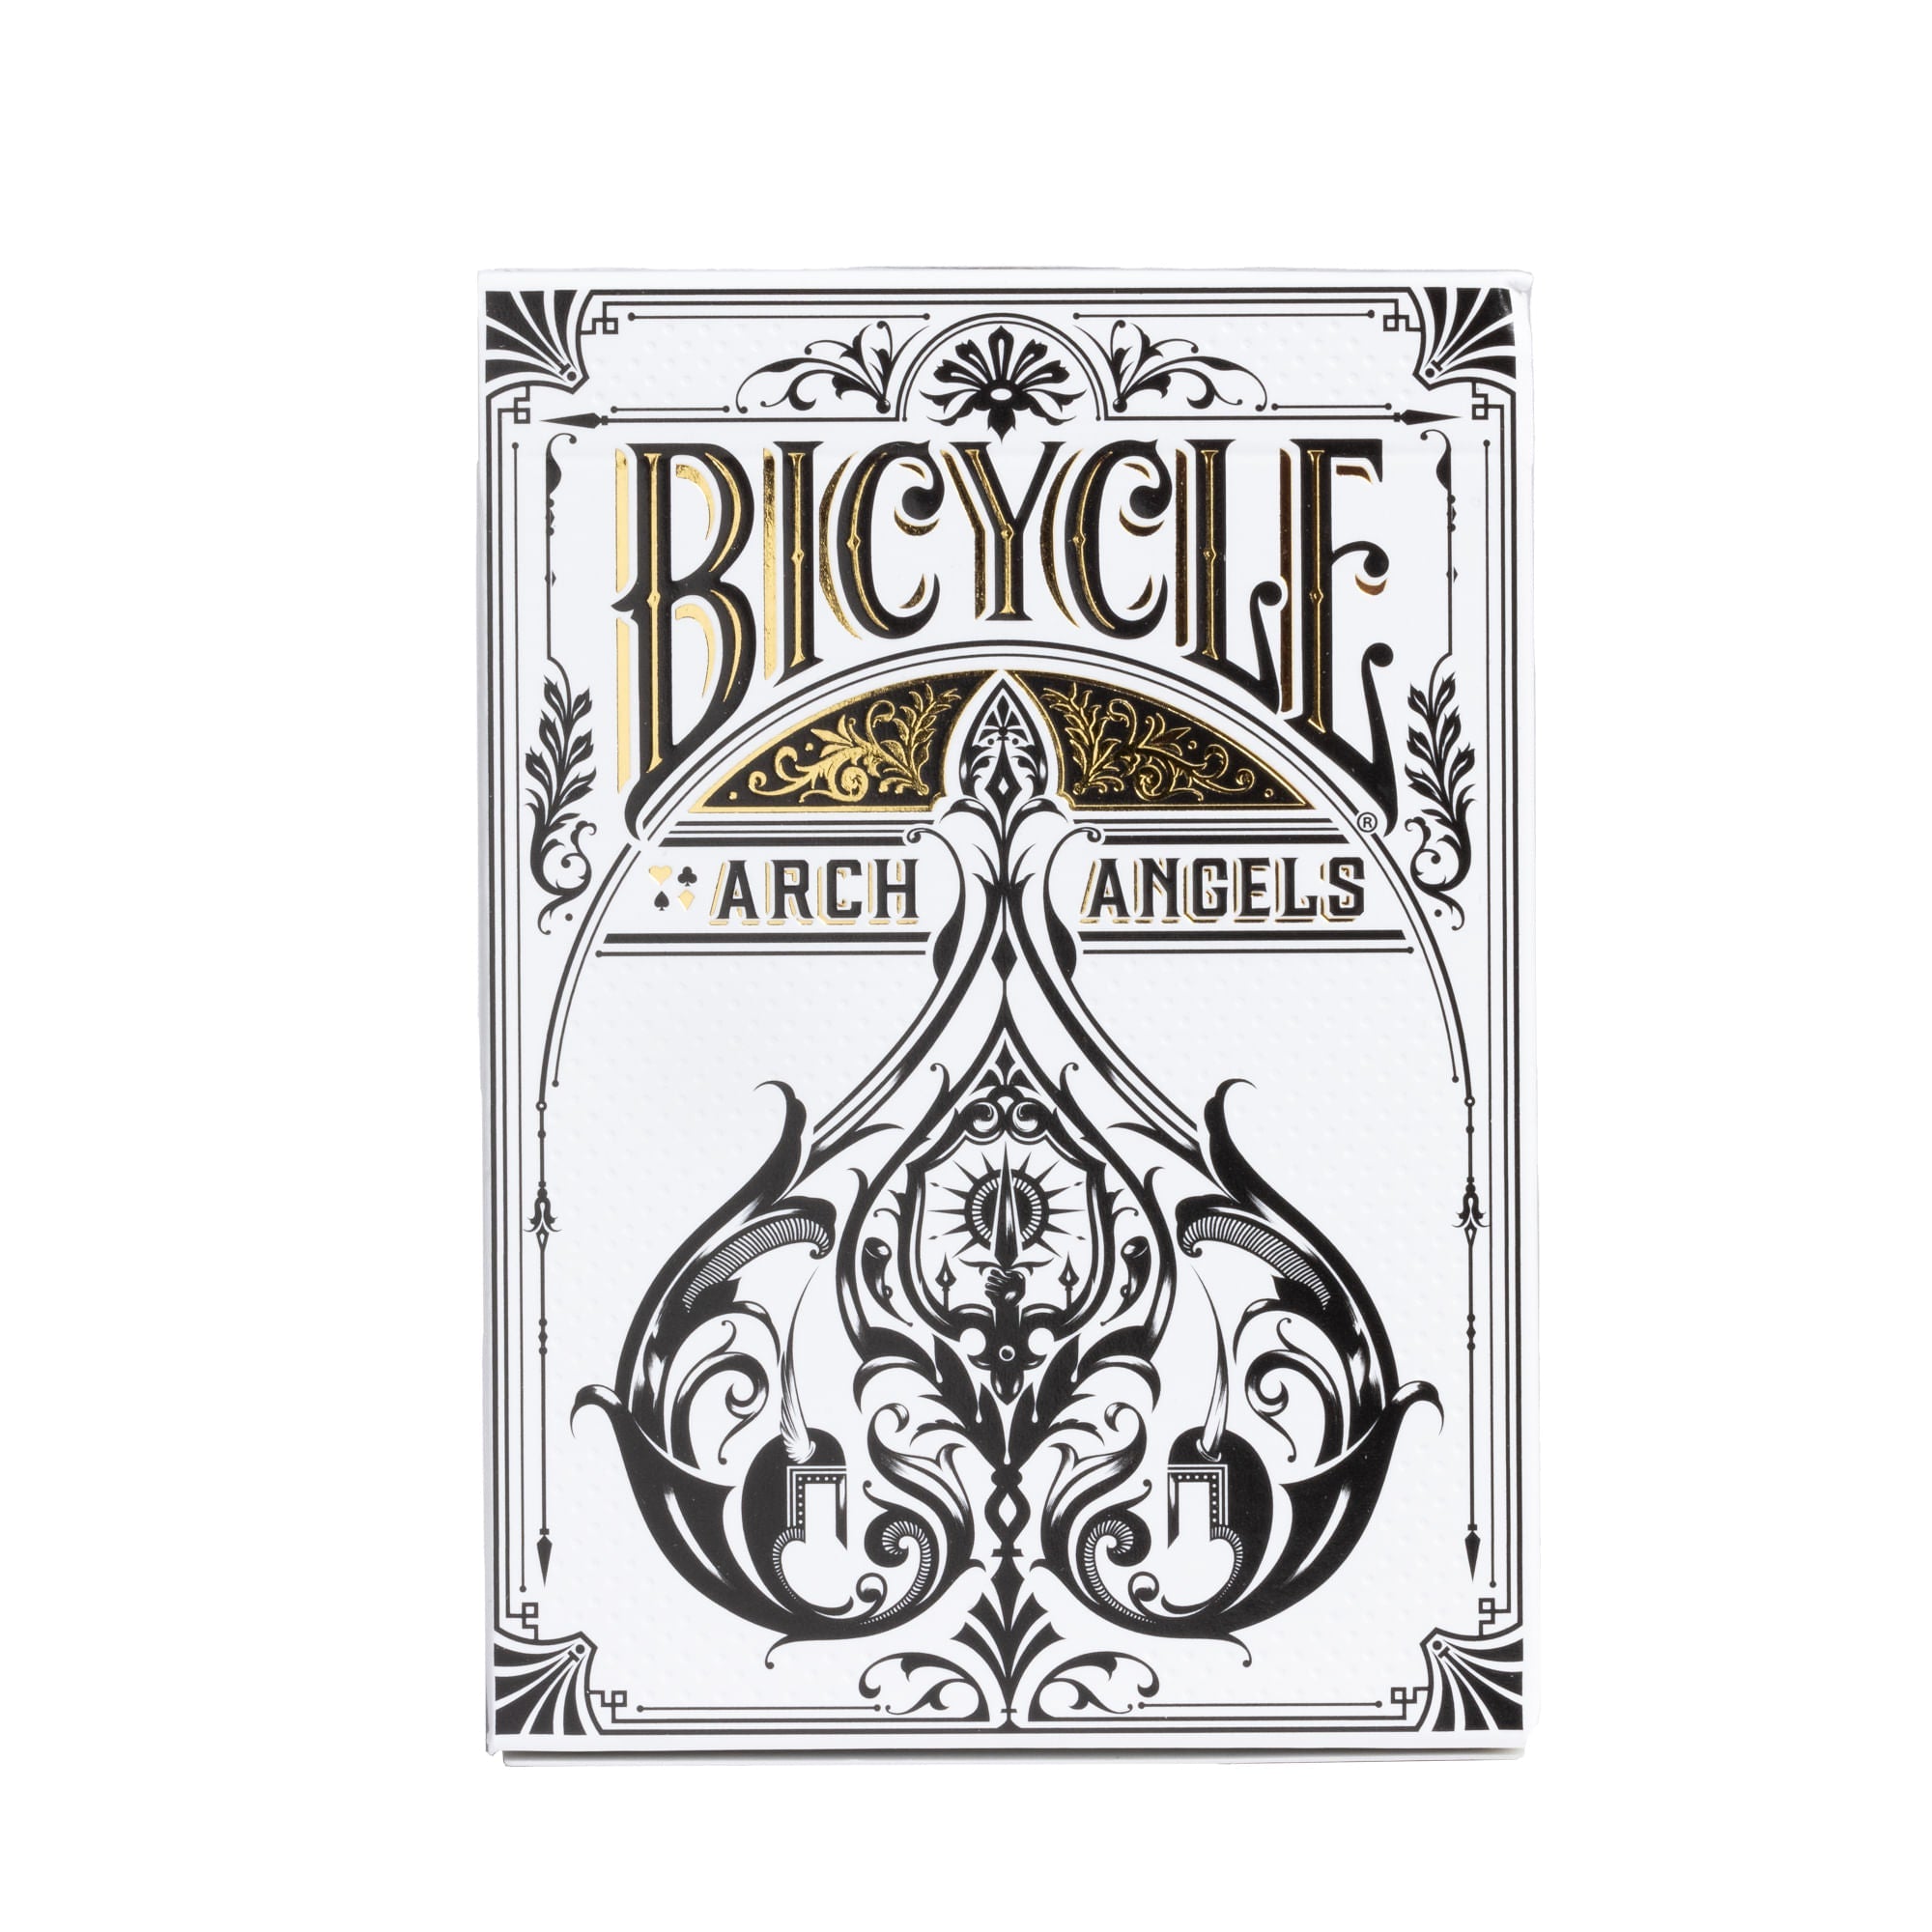 Bicycle Archangels Playing Cards-United States Playing Cards Company-Ace Cards & Collectibles